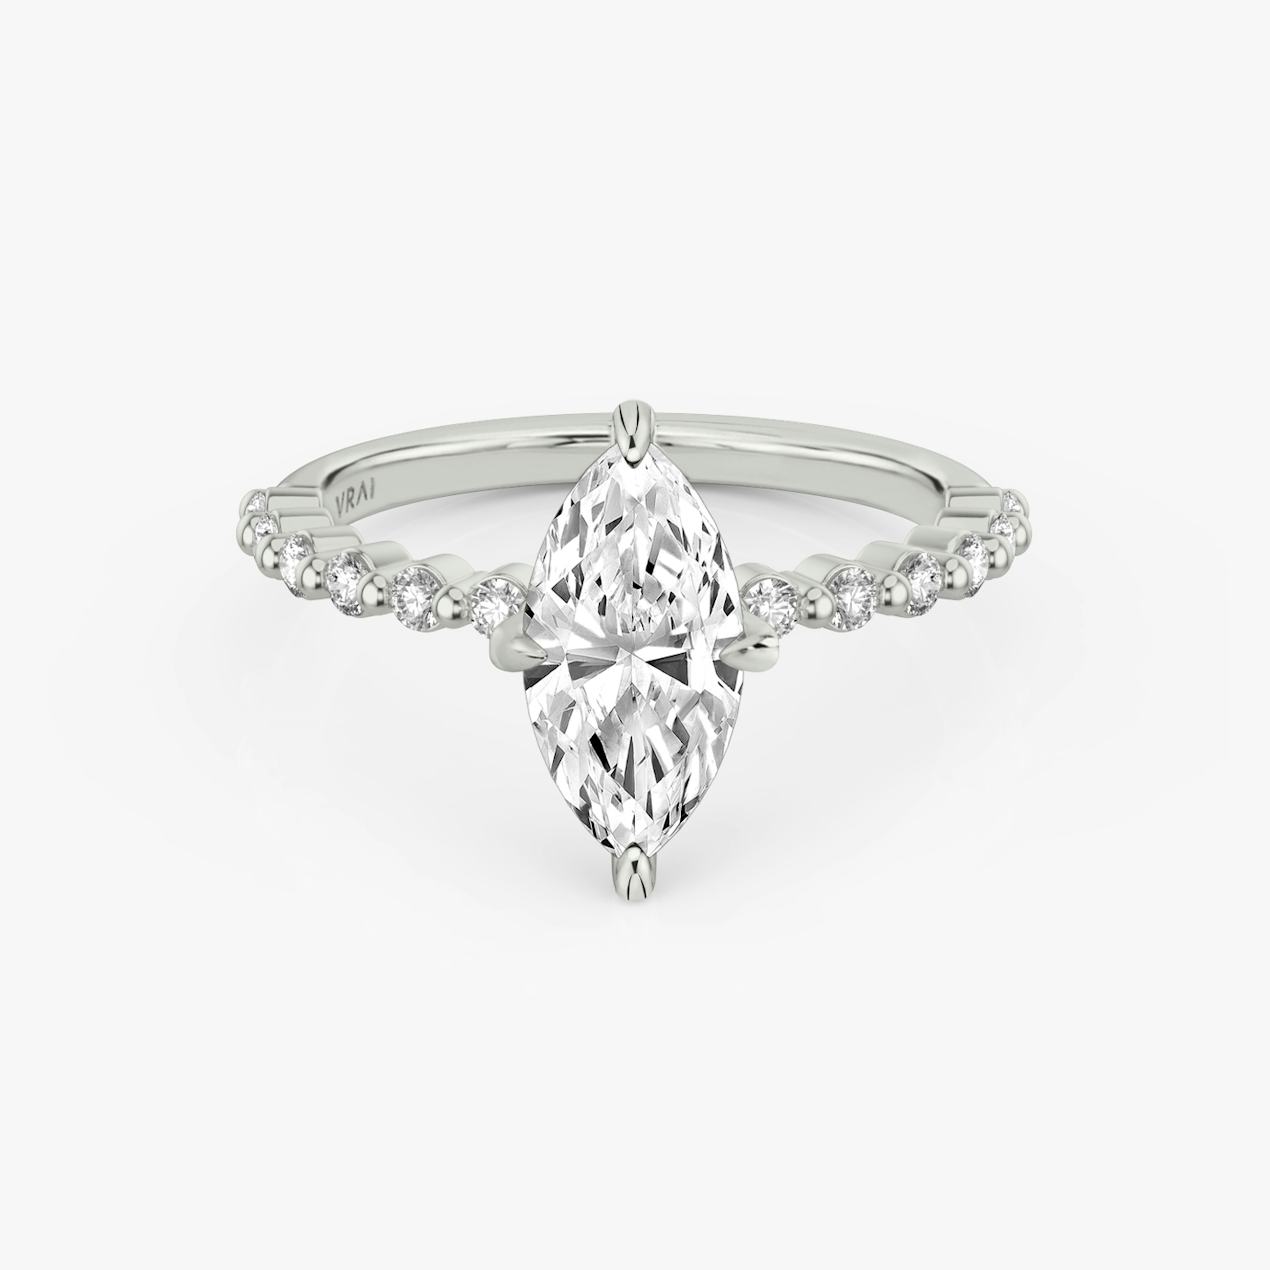 The Single Shared Prong Marquise Ring